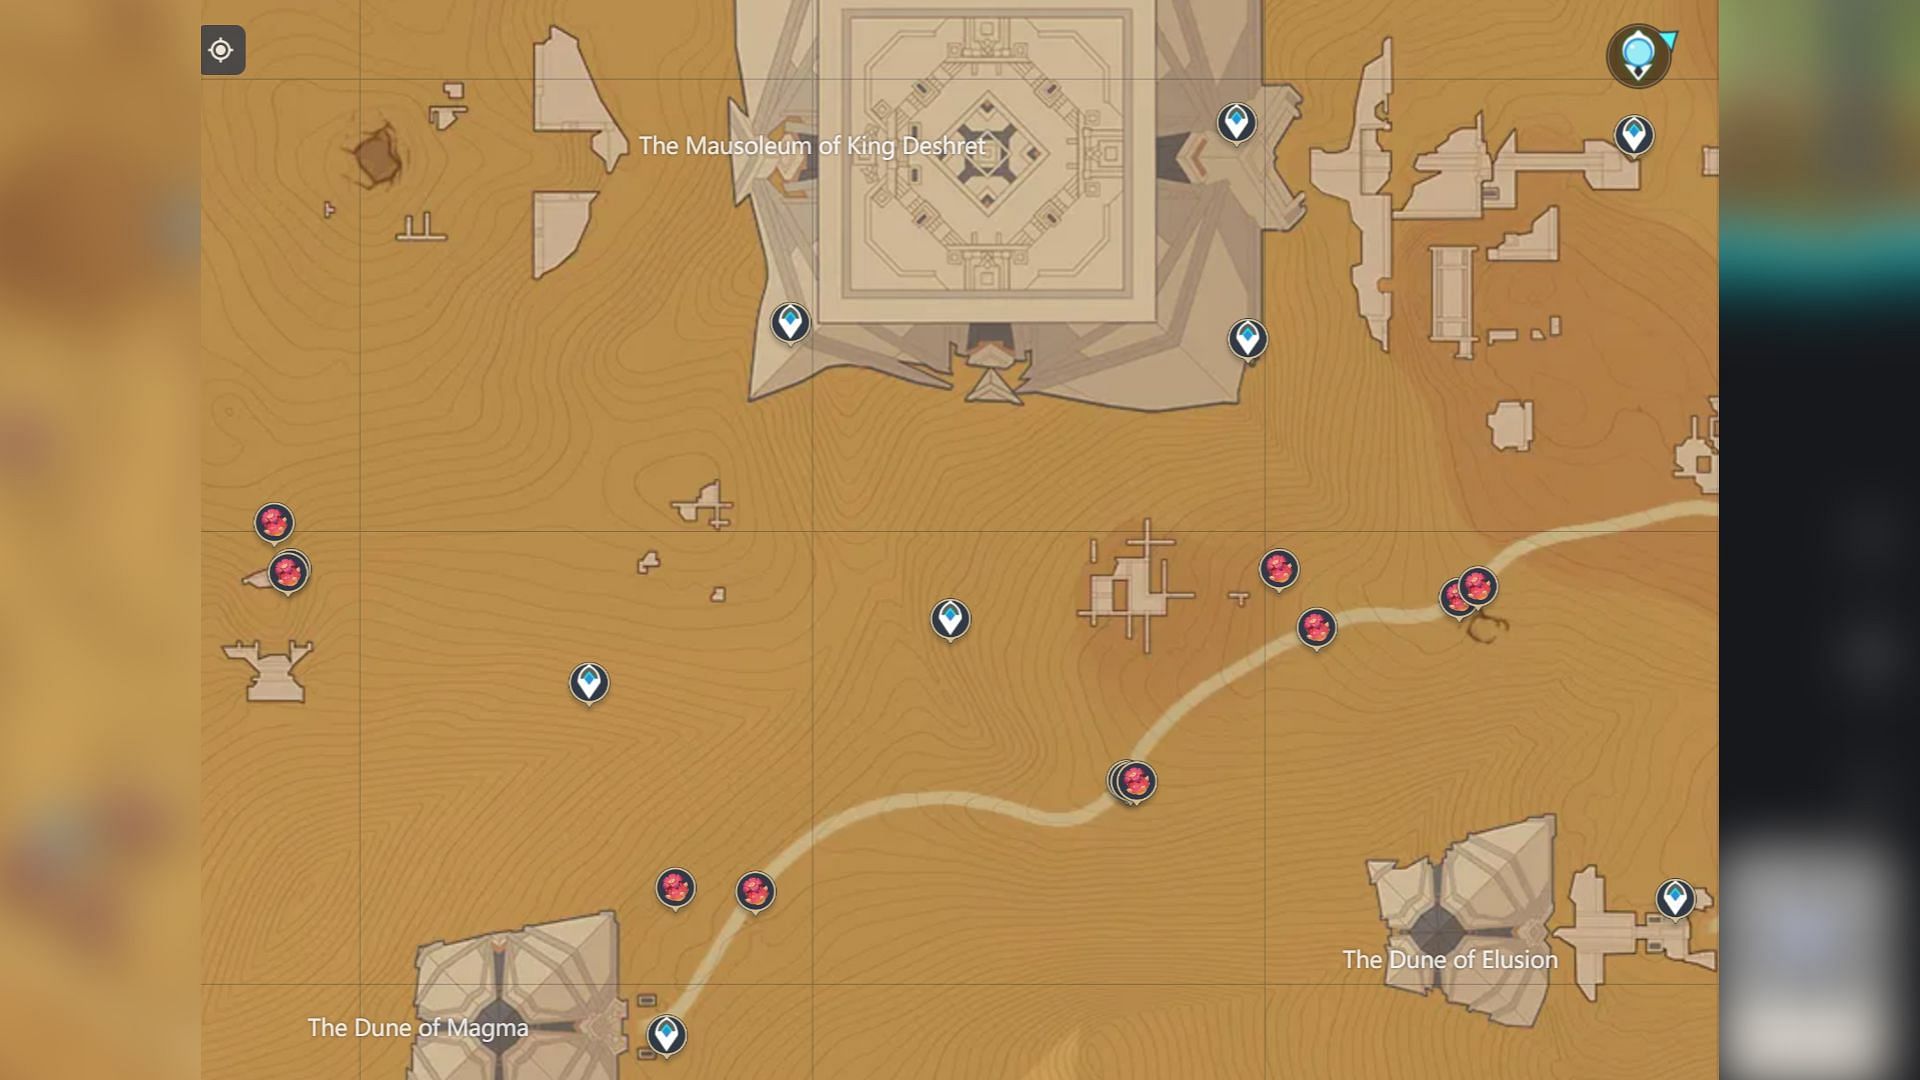 Henna Berry spawn locations in Dune of Magma (Image via HoYoverse)